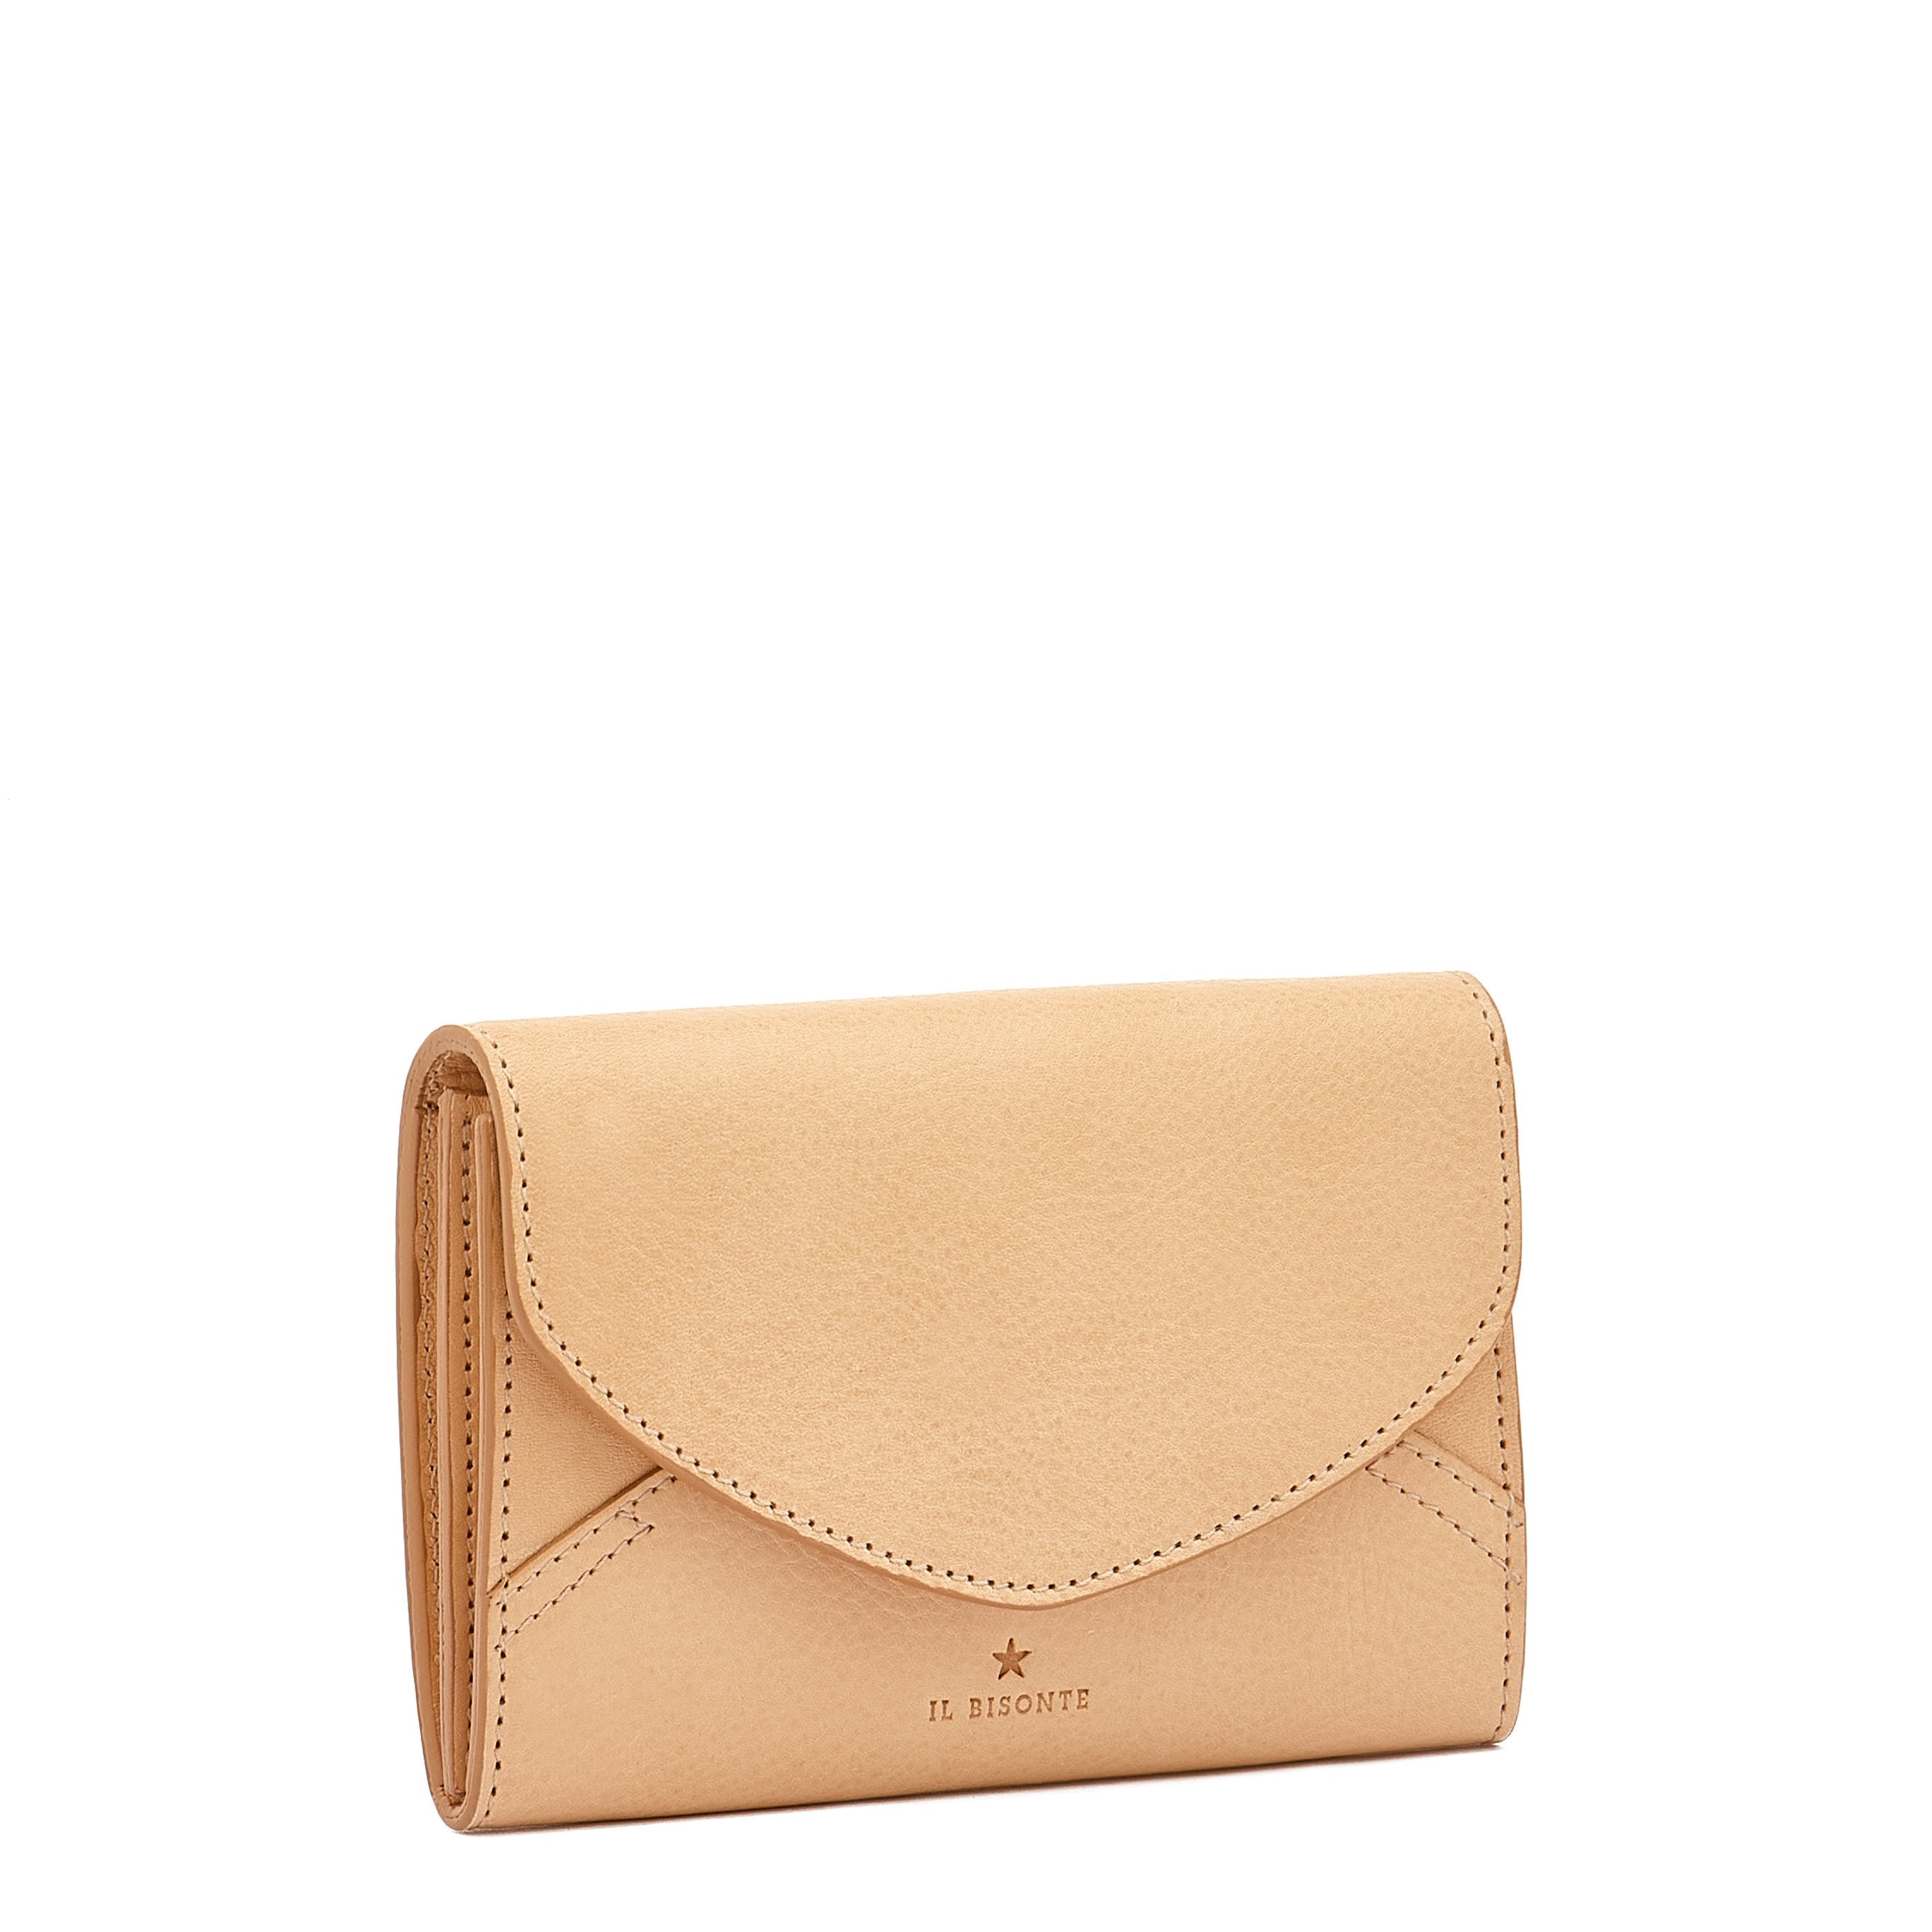 Esperia | Women's wallet in leather color natural